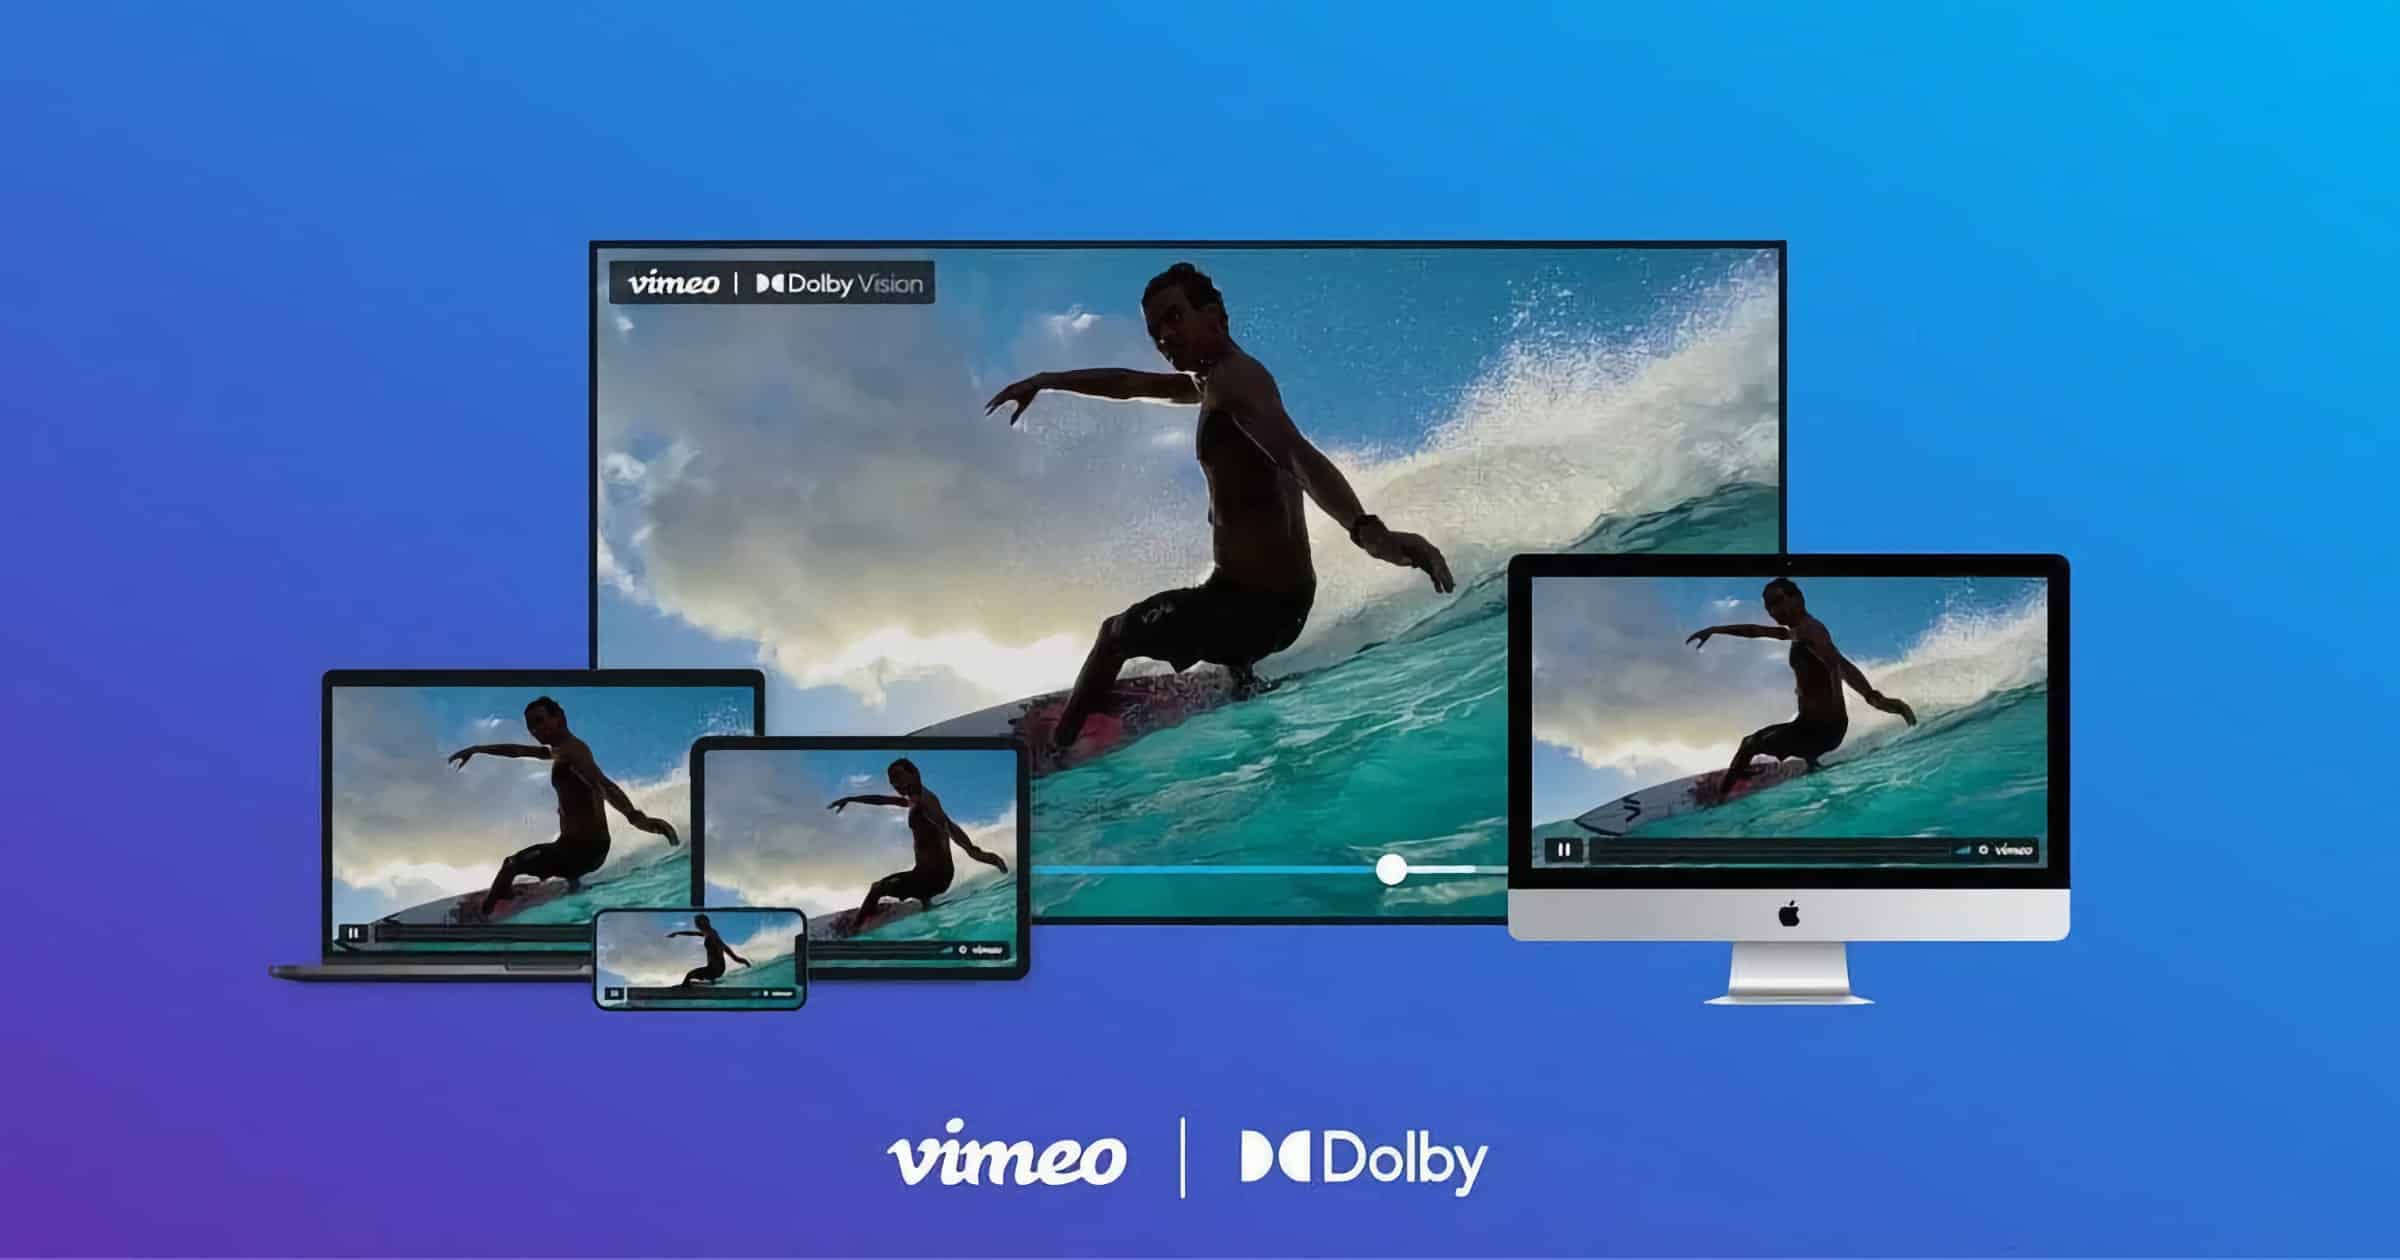 Vimeo Adds Support for Dolby Vision HDR on Apple Devices